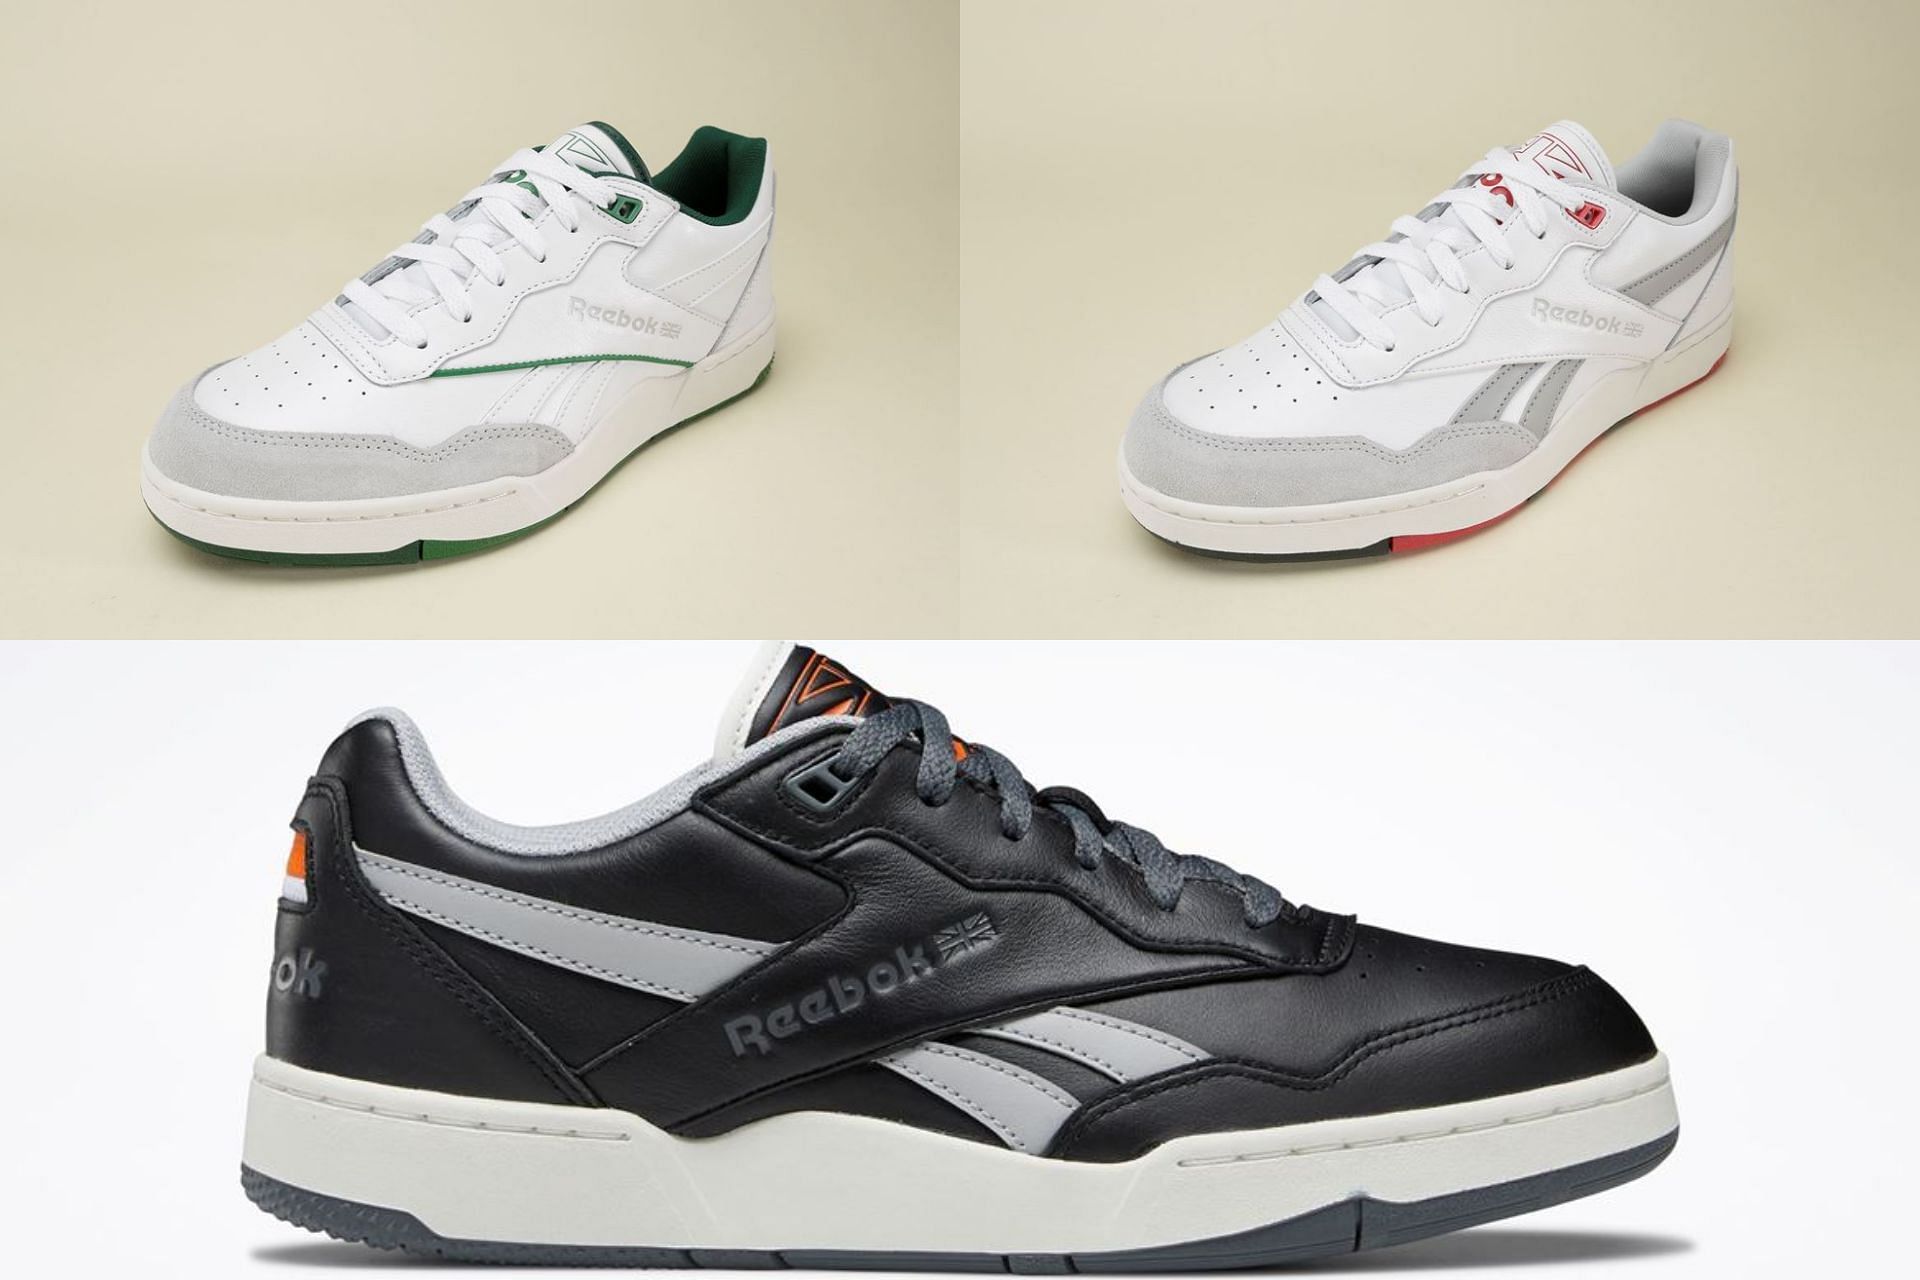 Where to buy Reebok BB 4000 II sneakers? Price, release date, and more ...